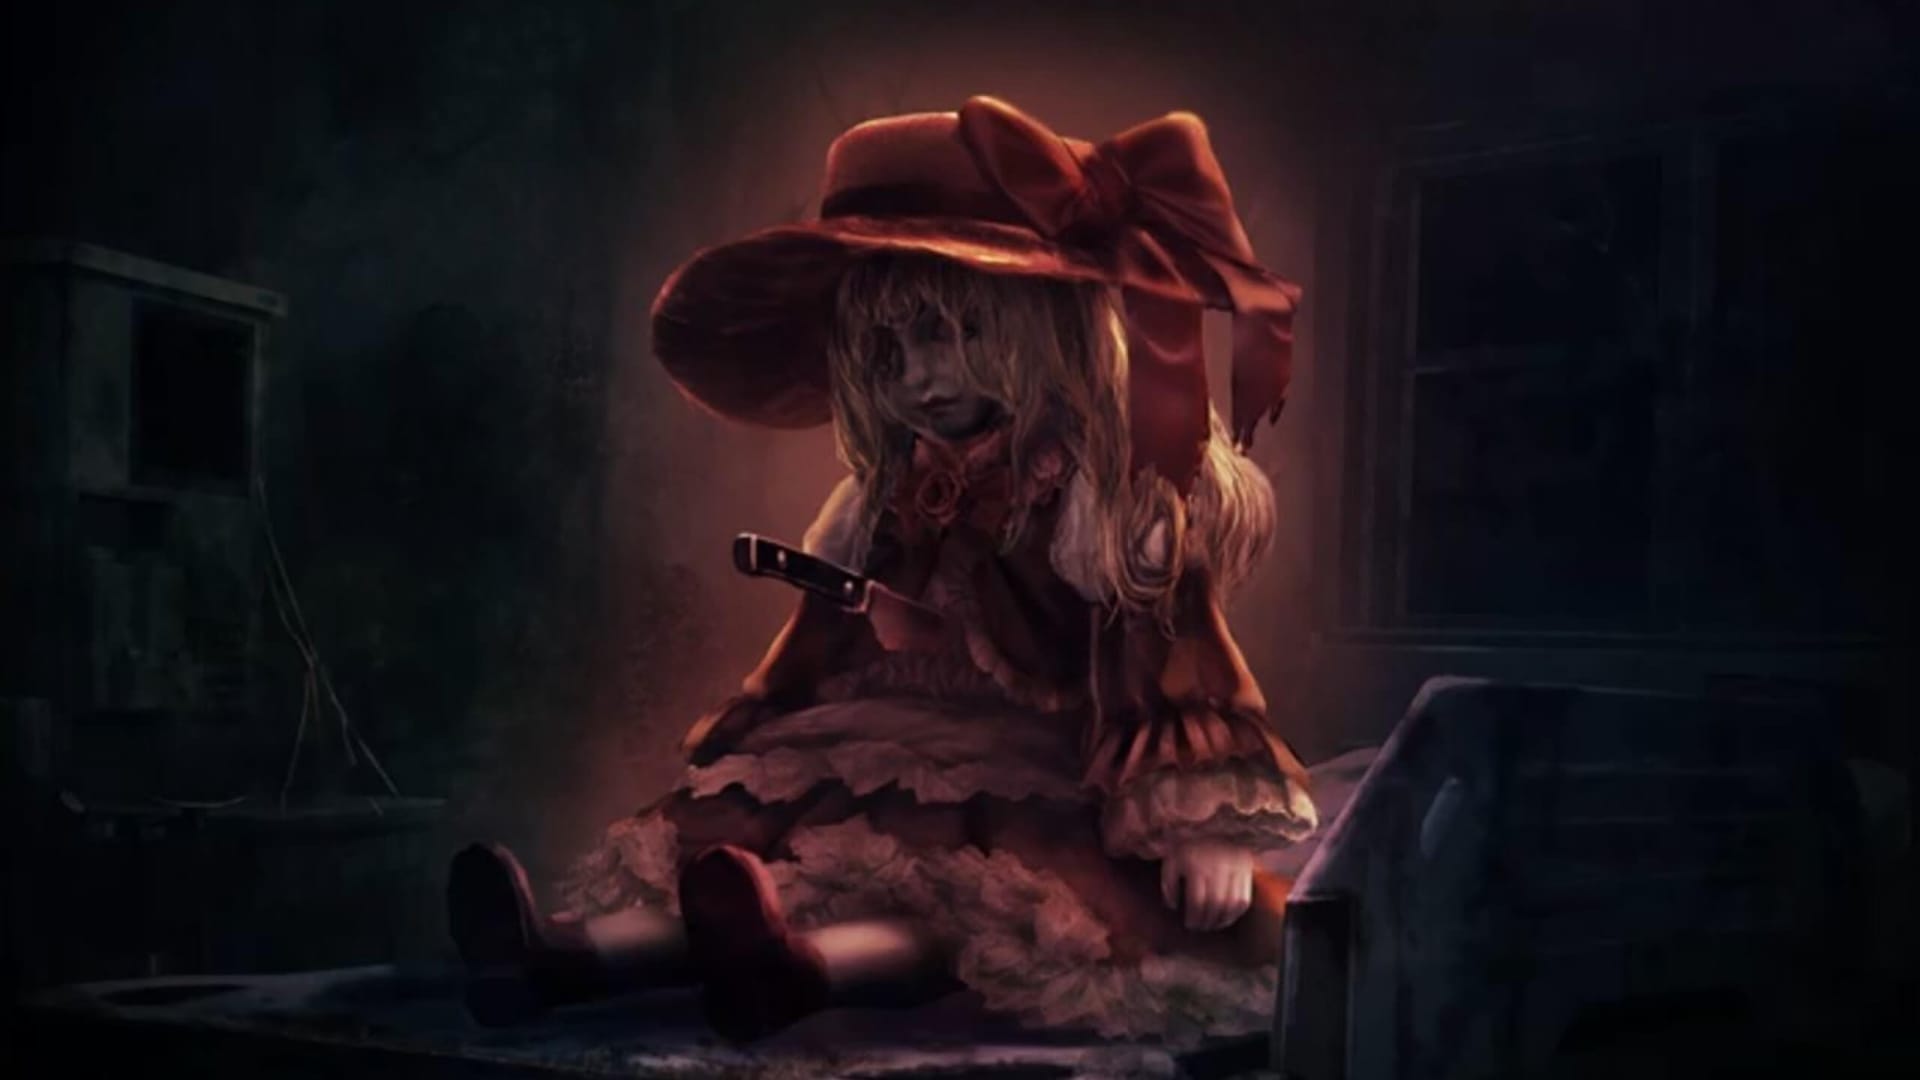 A creepy doll with a knife stabbed through it in artwork for Corpse Party II: Darkness Distortion